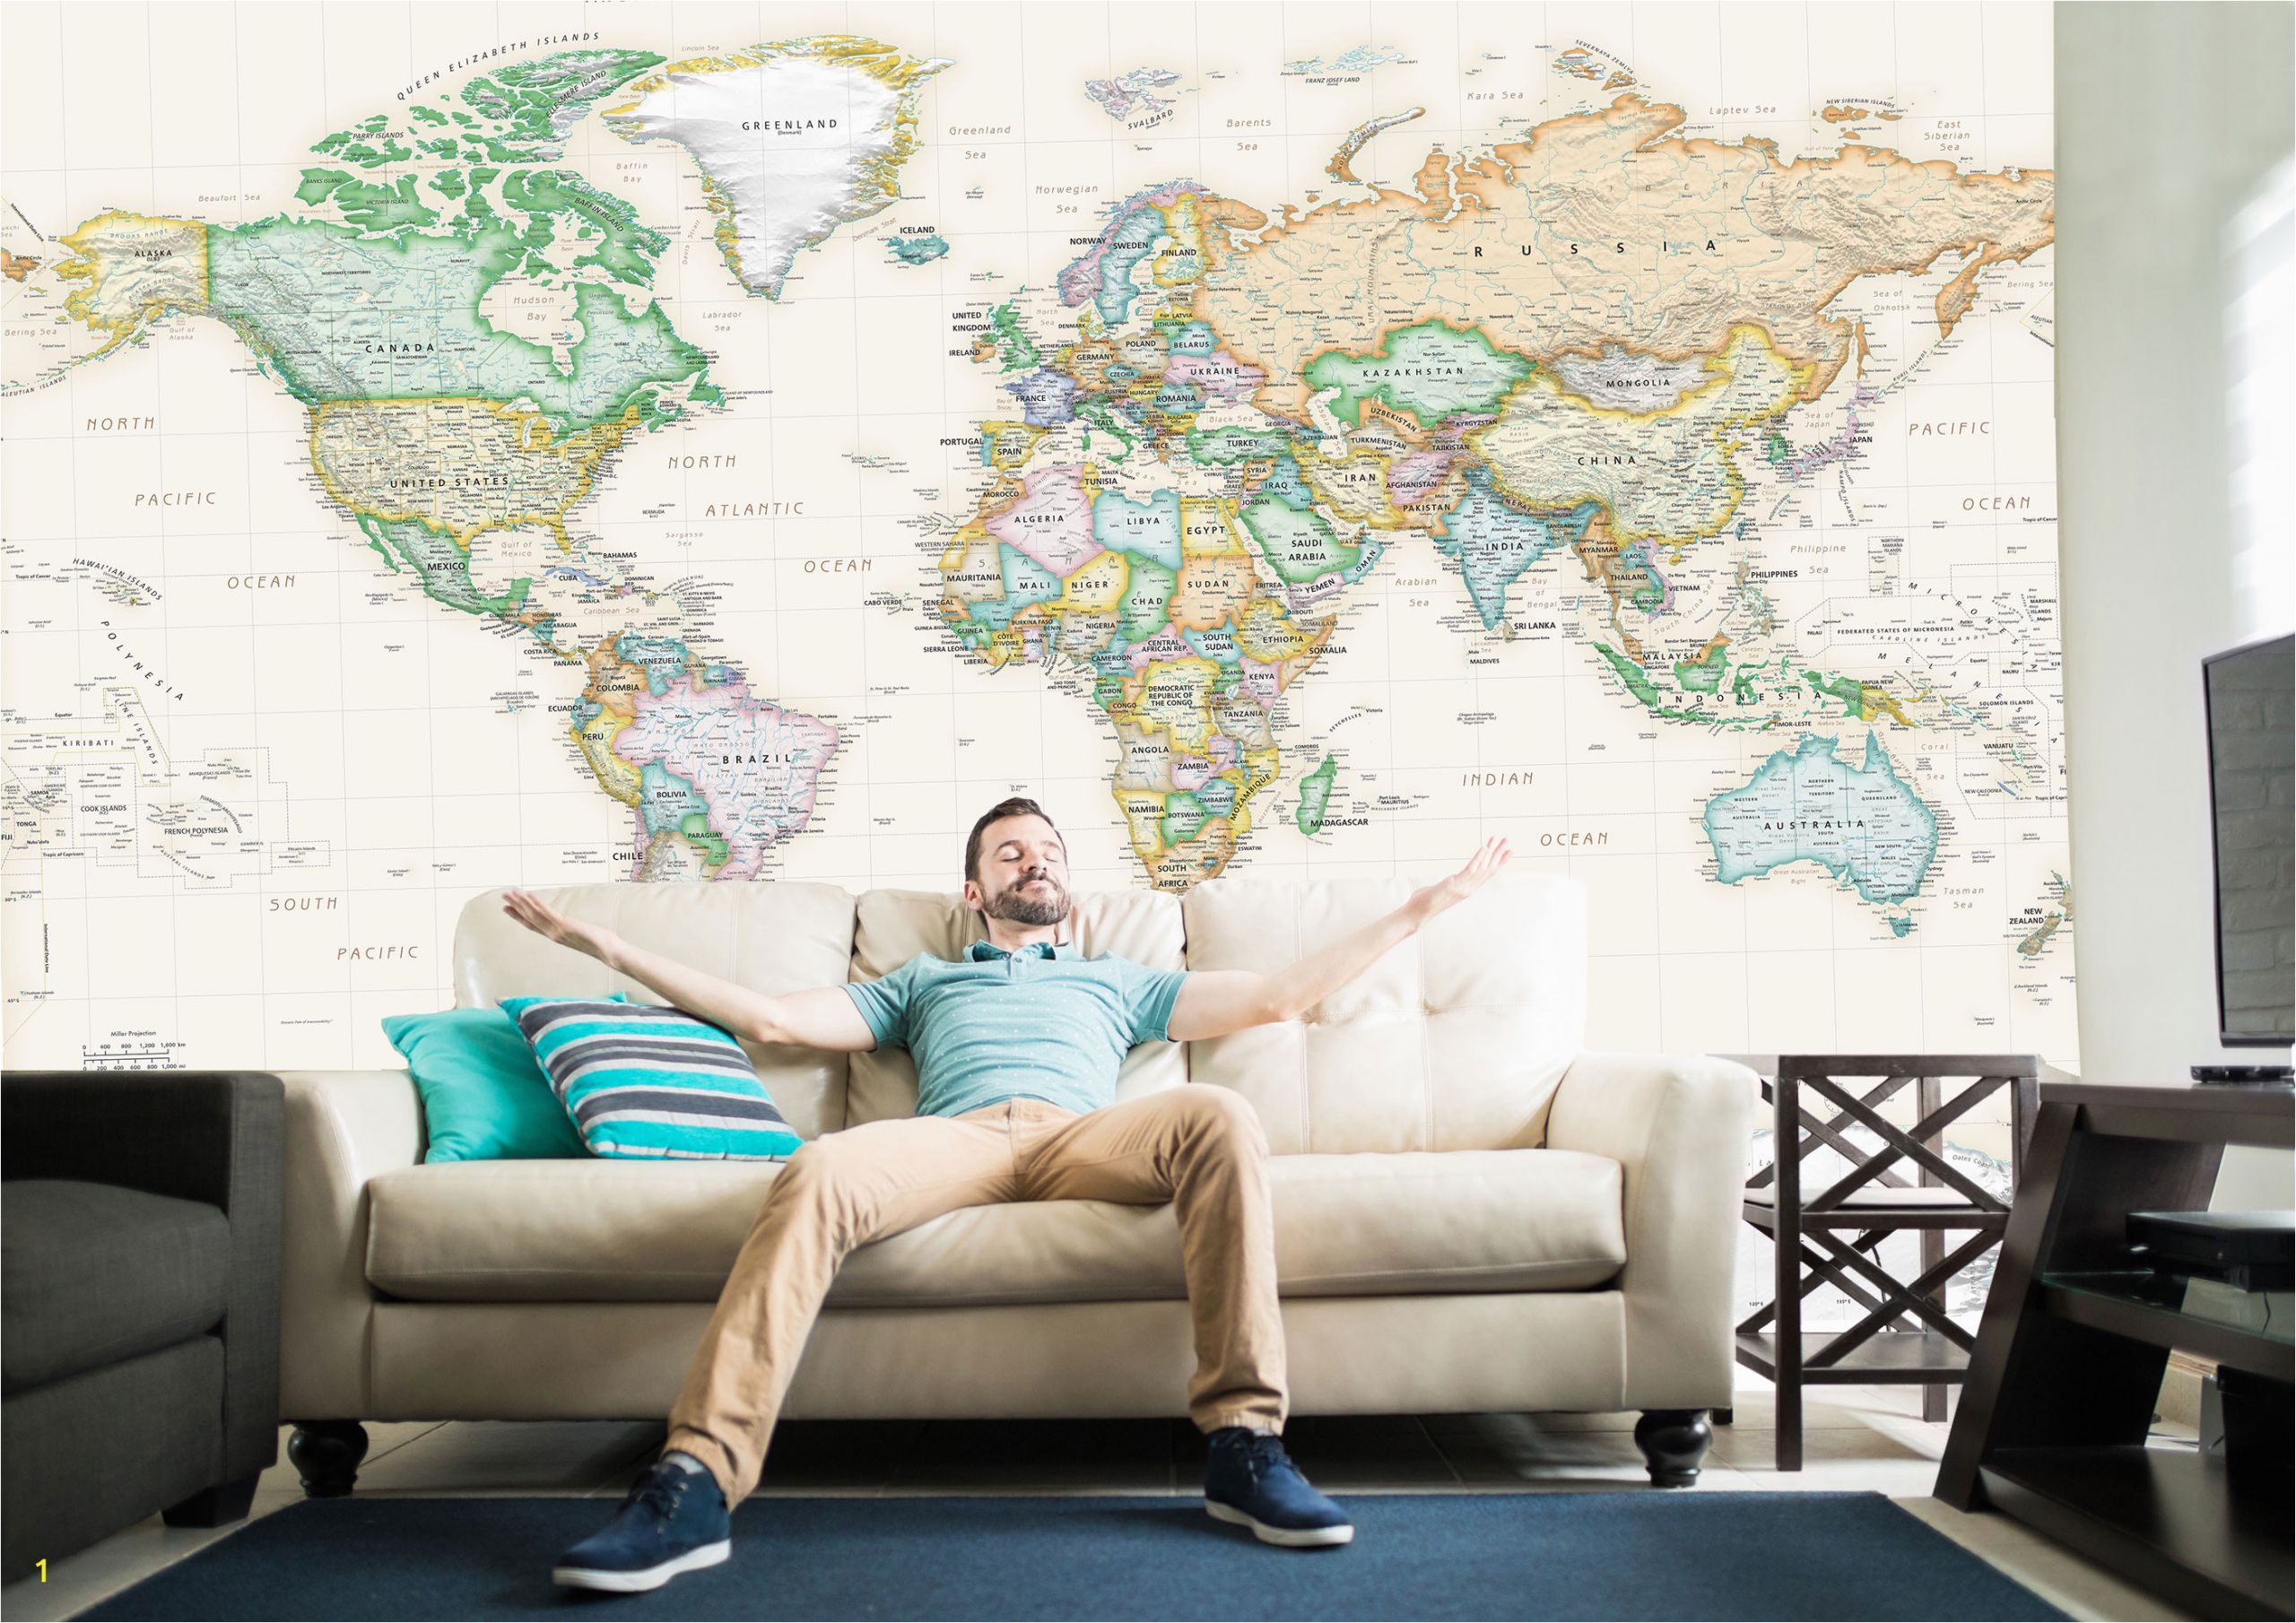 World Executive Wall Map Mural 41 World Maps that Deserve A Space On Your Wall